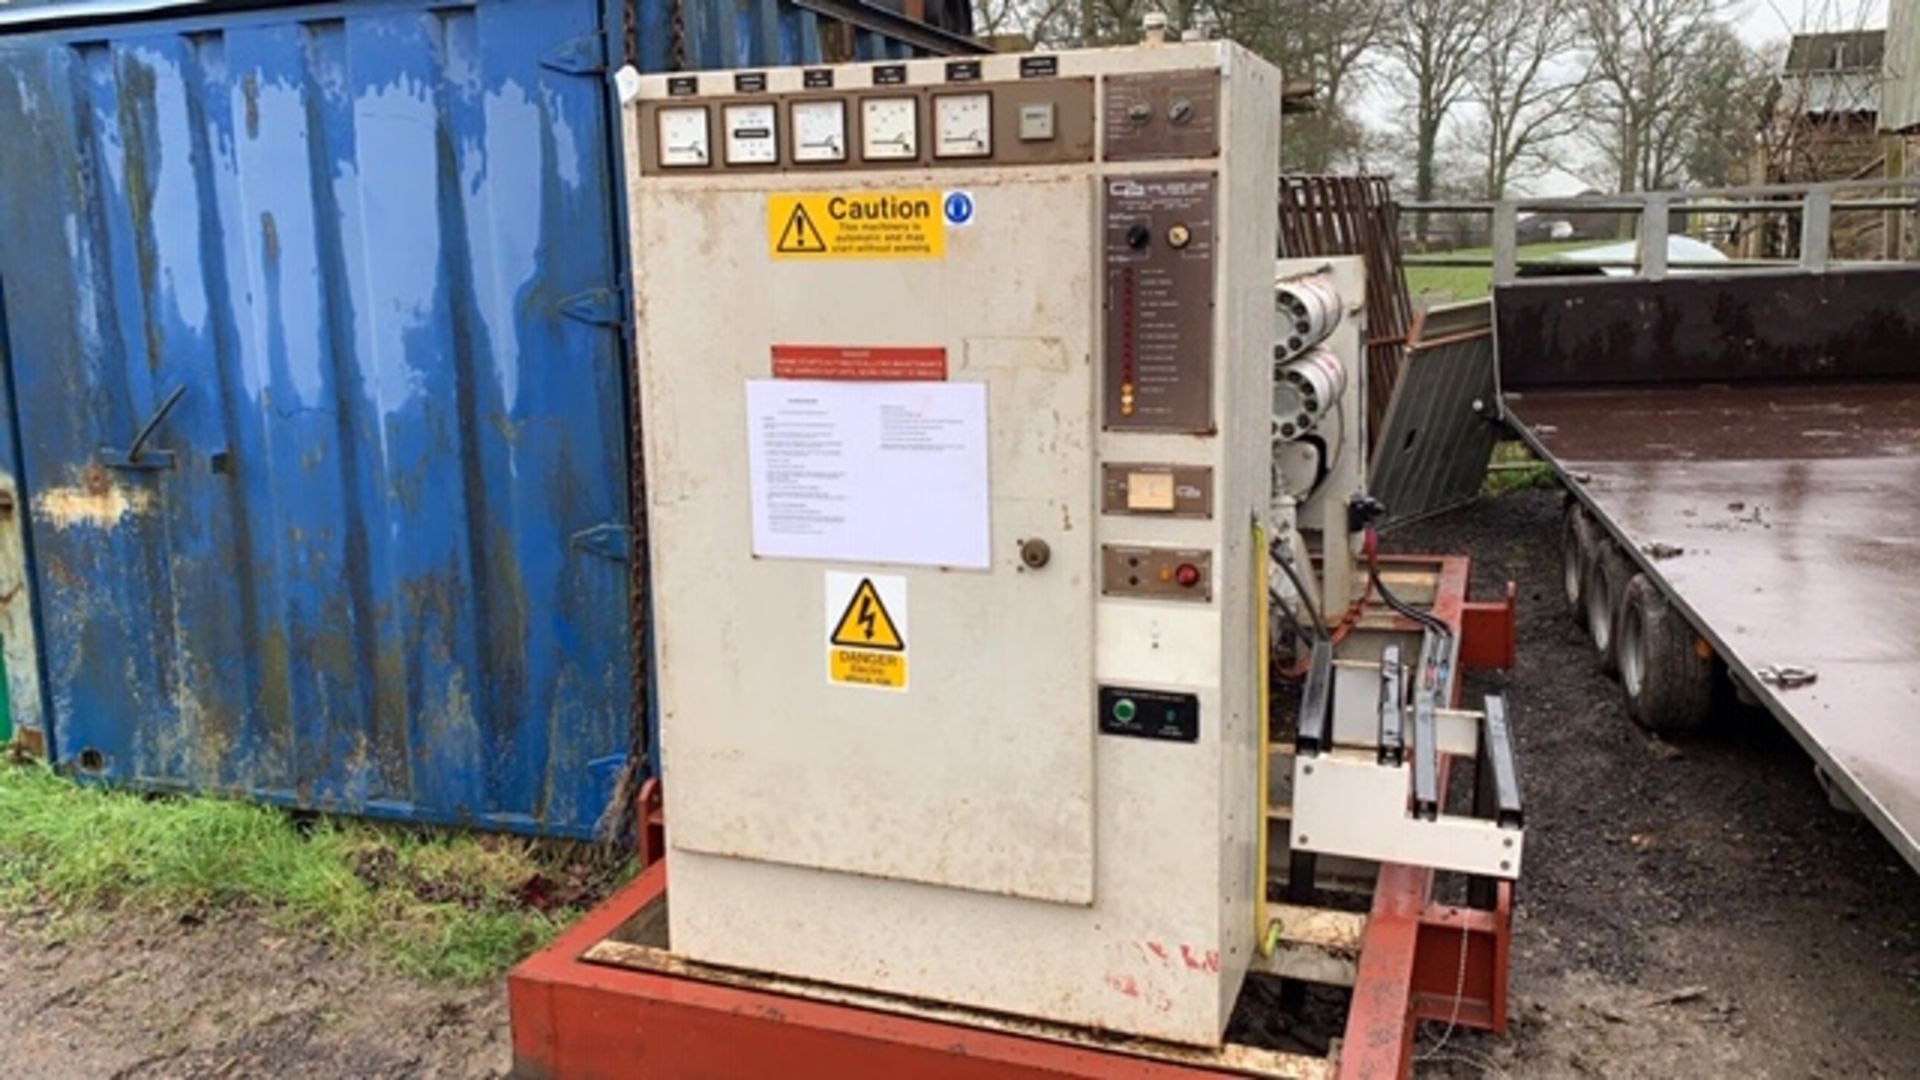 PUMA 200KVA VOLVO TURBO ENGINED DIESEL GENERATOR, PREVIOUS AIRPORT STANDBY UNIT, SHOWING 478REC HRS. - Image 4 of 5